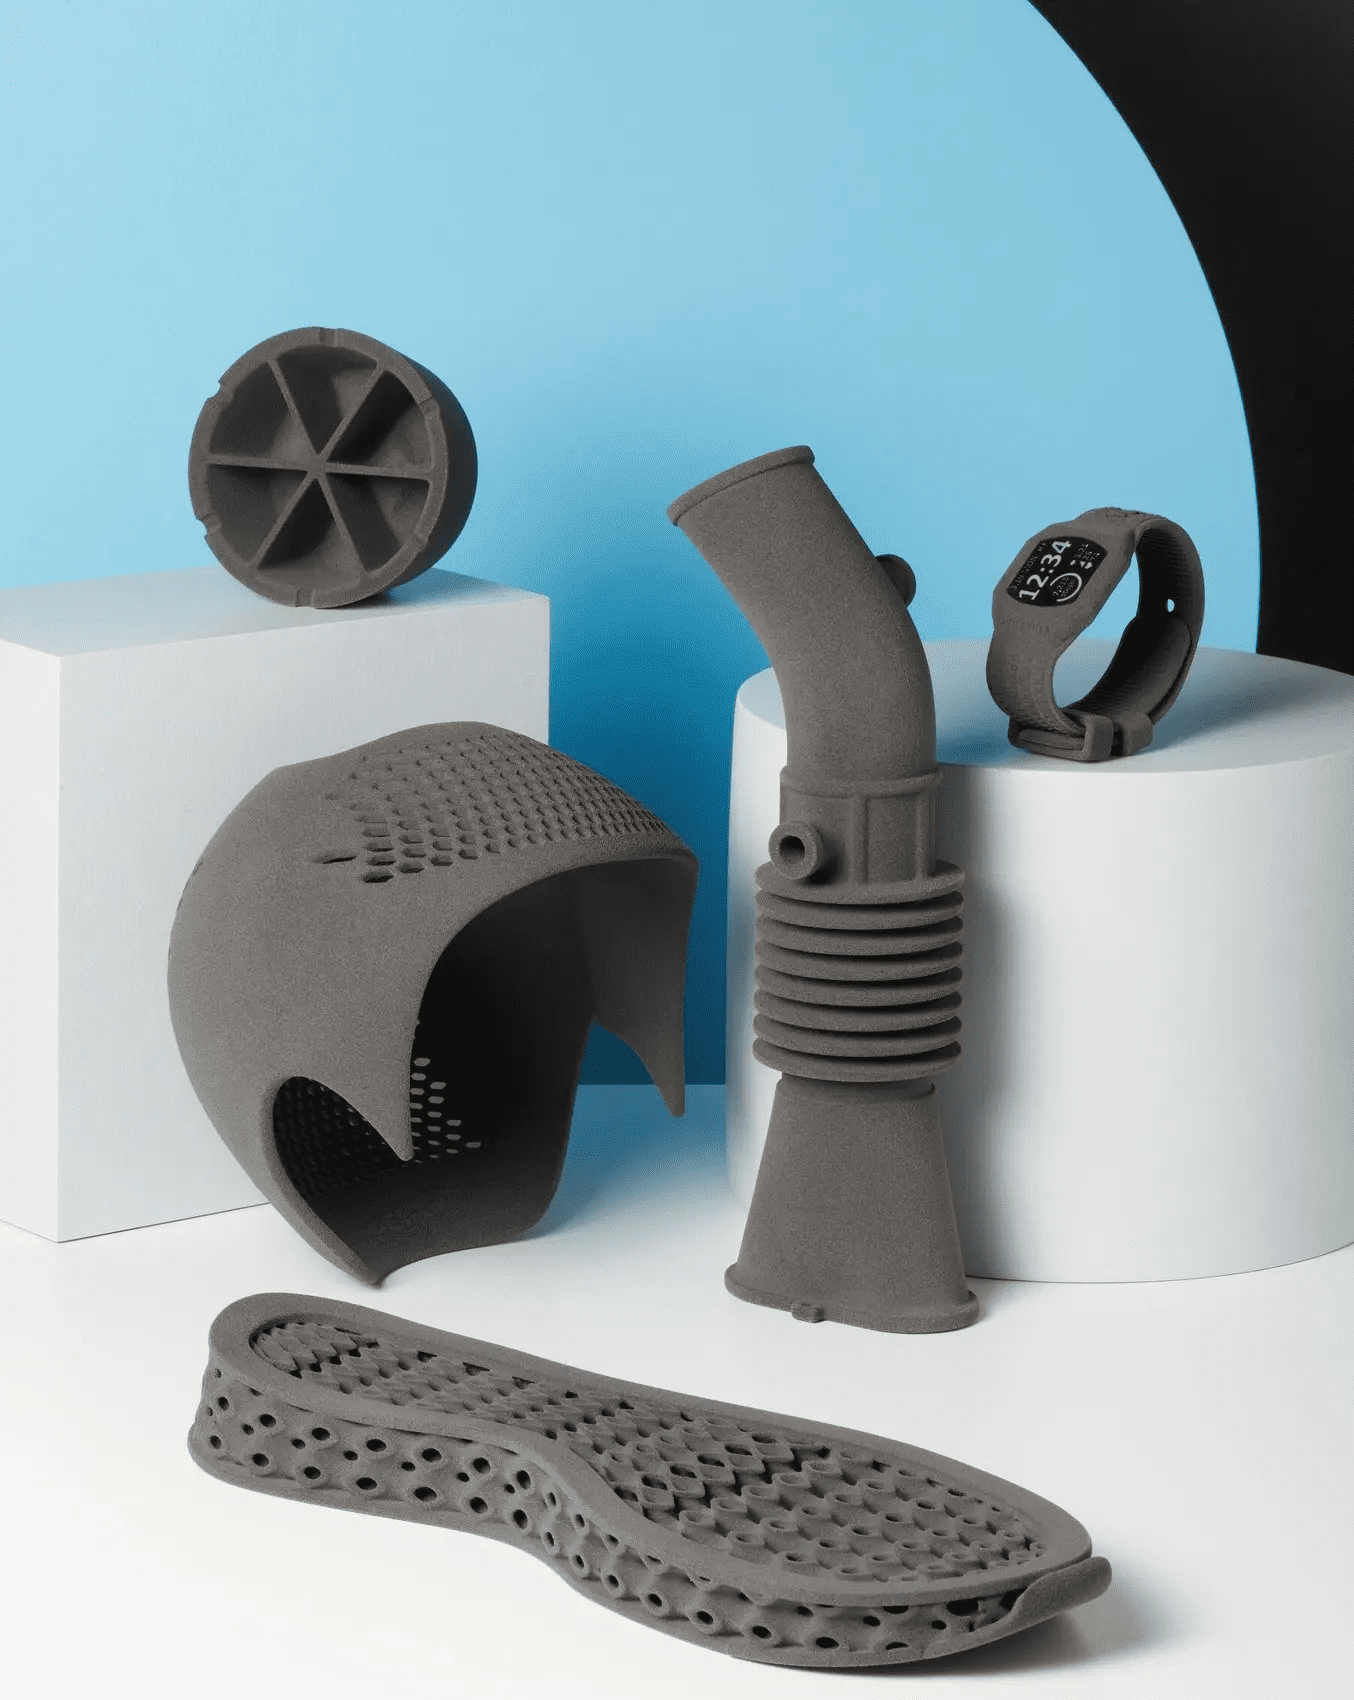 Image shows 3D-printed parts with Formlabs TPU 90A